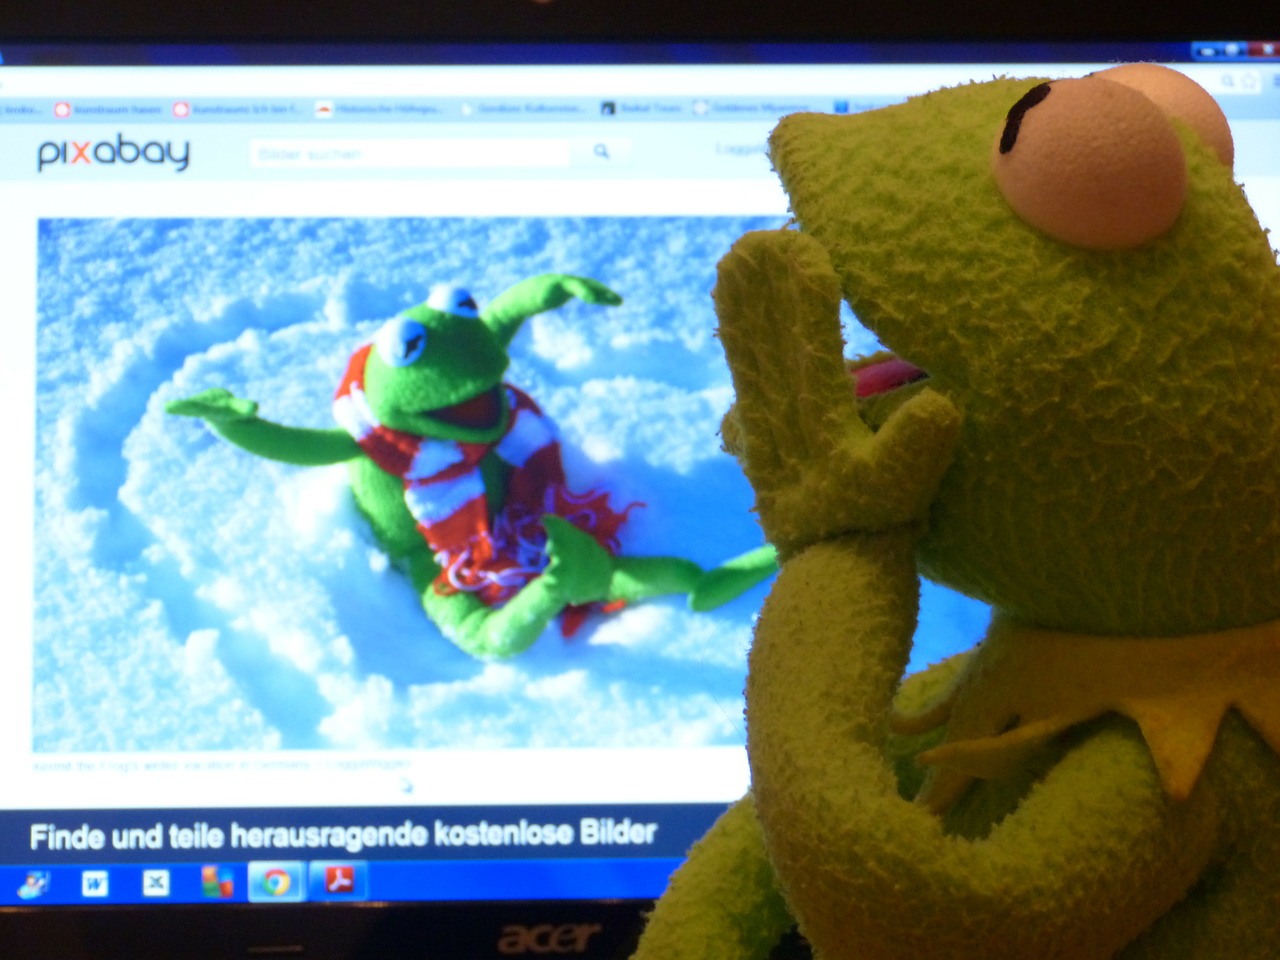 kermit,frog,computer,pixabay,see,preview image,pc,images,marvel,free pictures, free photos, free images, royalty free, free illustrations, public domain